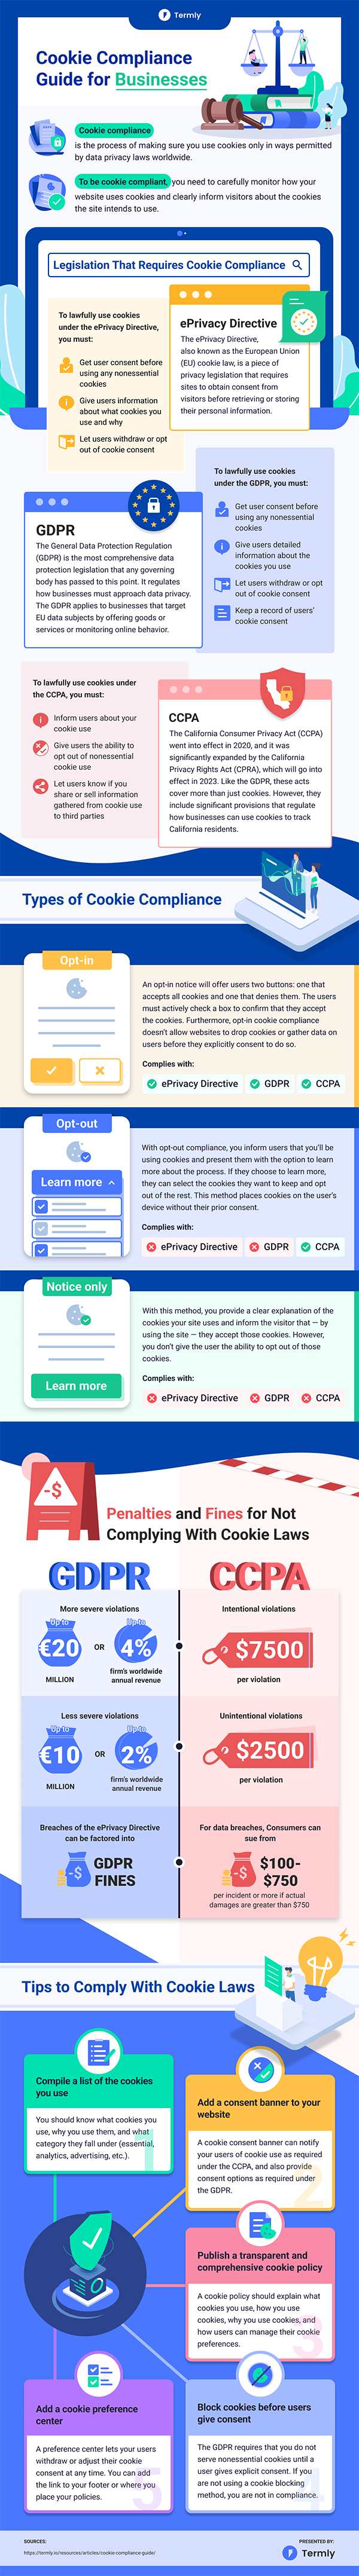 Cookie-Compliance-Guide-for-Businesses-Infographic